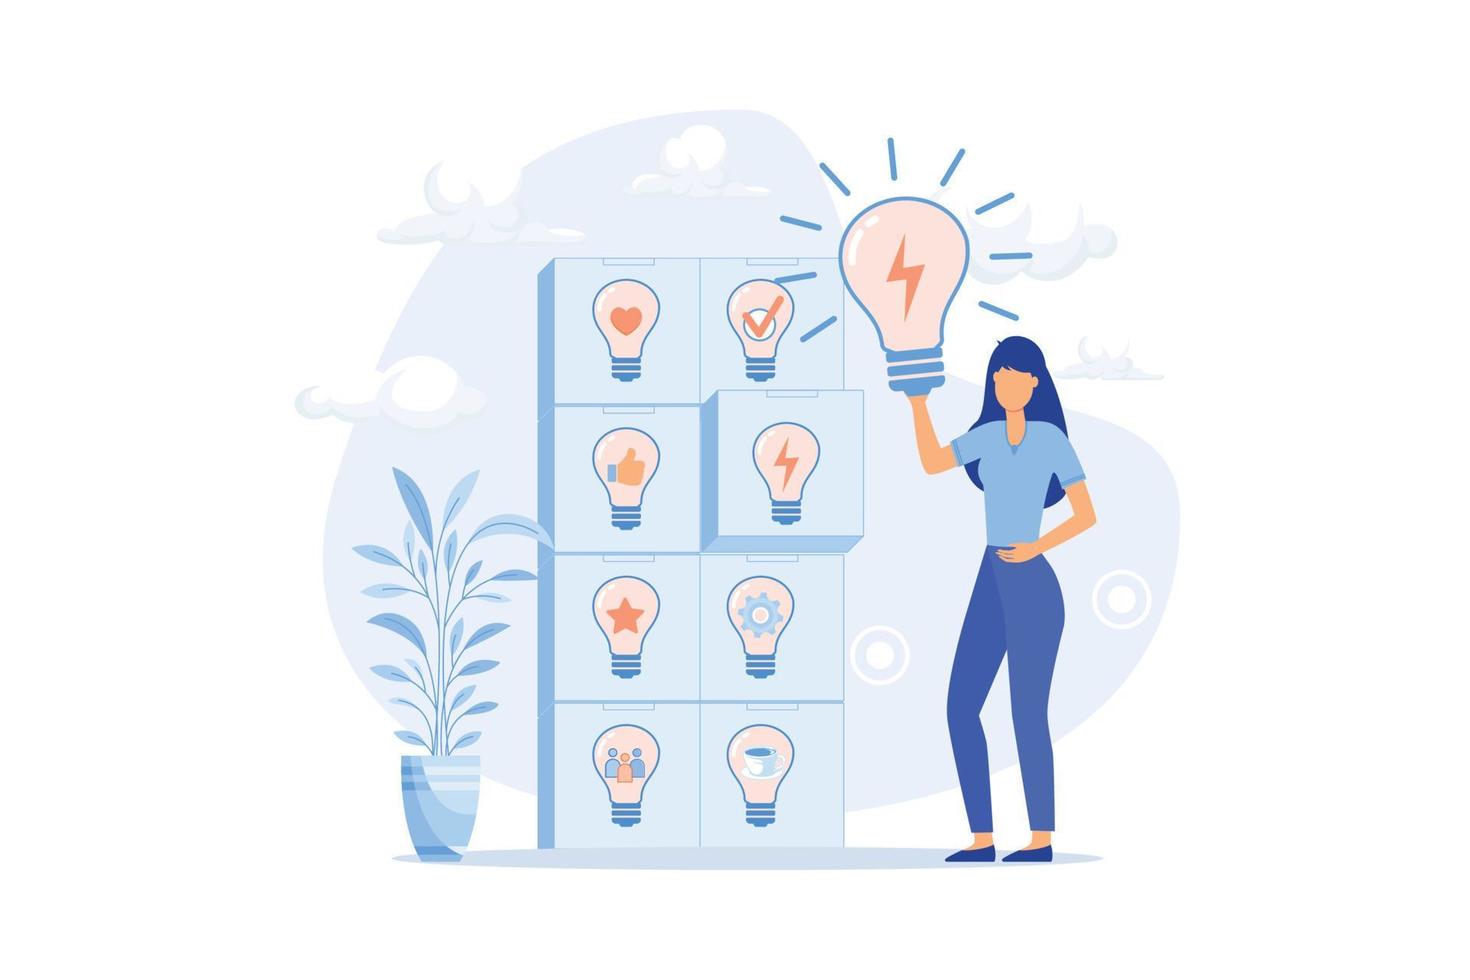 ideas and best option selection concept. Innovative brainstorming and finding right solution for business. girl thinks and develops new growth strategy. Modern flat illustration vector